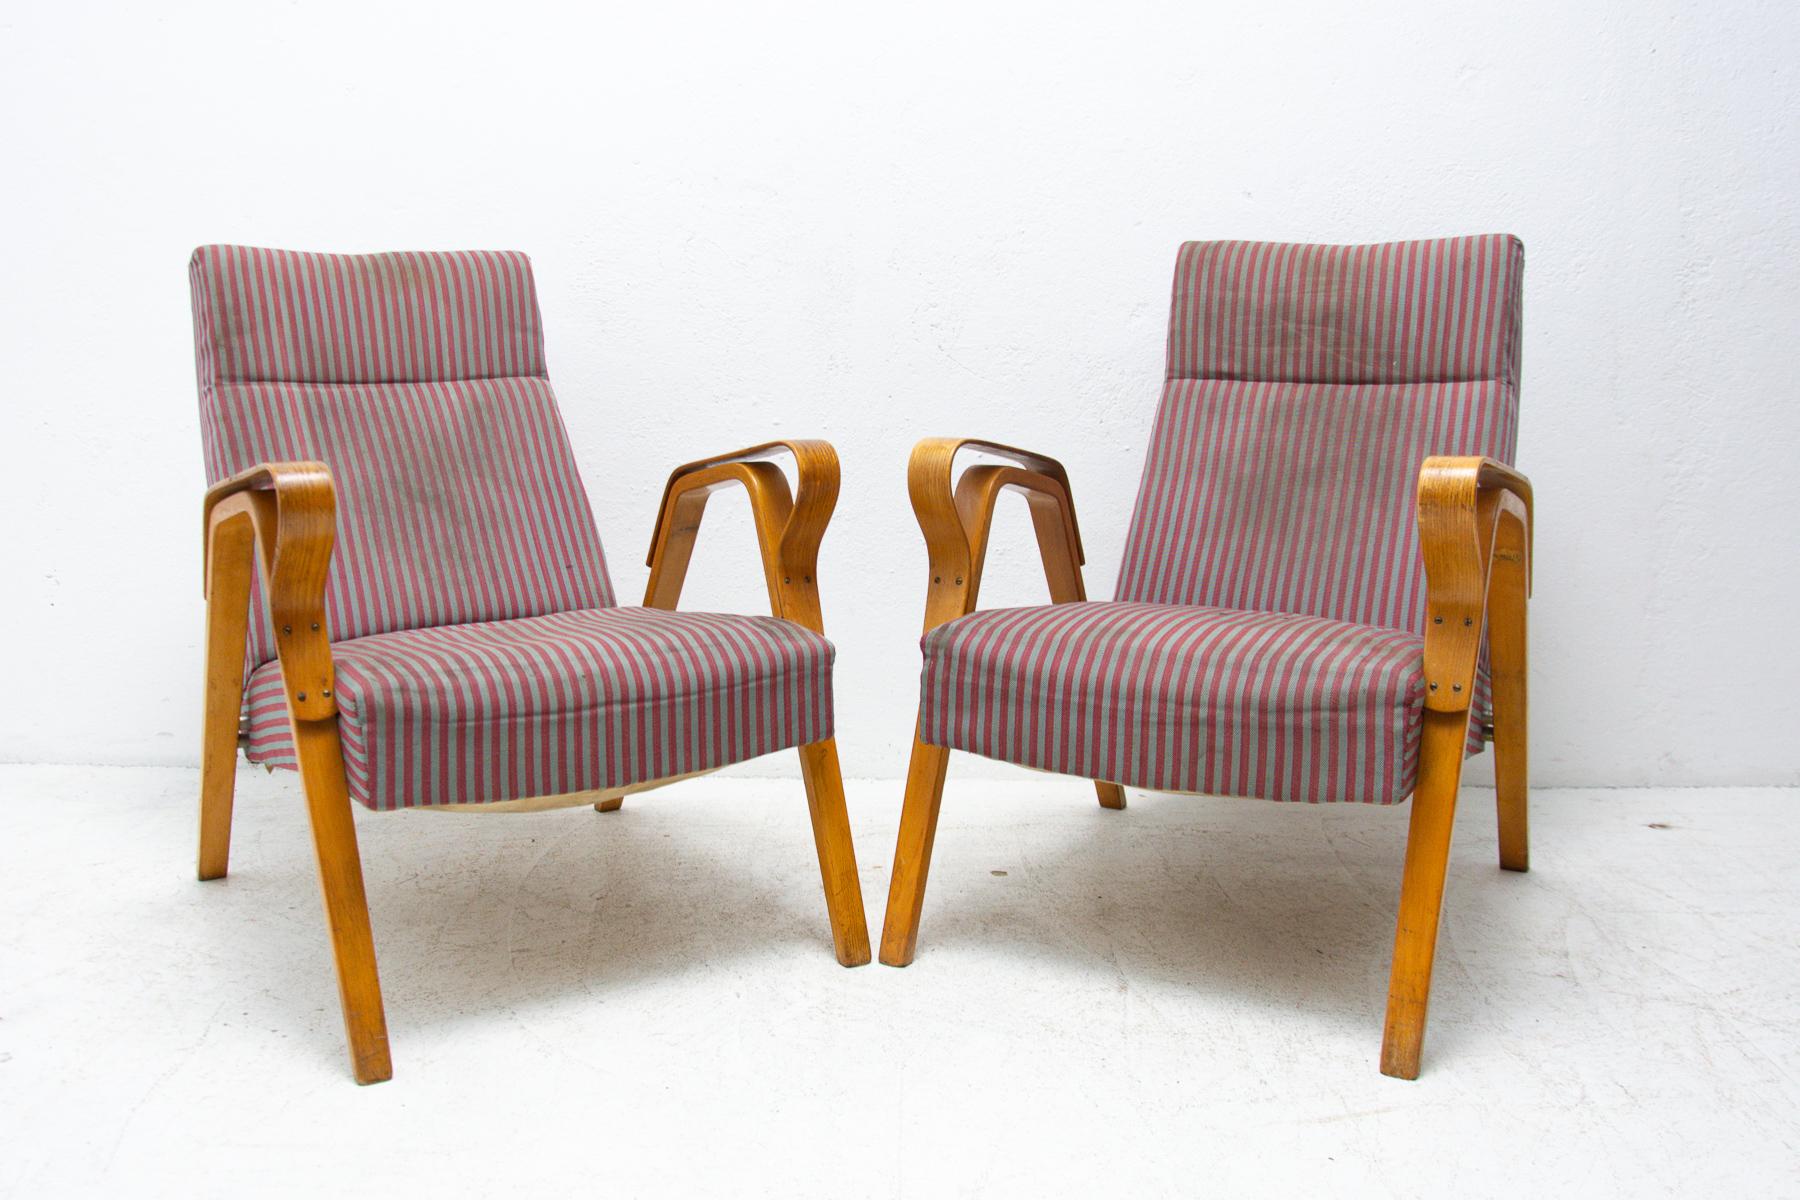 These Czechoslovak lounge armchairs No.24-23 were designed by František Jirák for Tatra Nabytok in the former Czechoslovakia in the 1960´s. The design of these chairs followed the huge success of the Czechoslovak pavilion at the Brussels Expo